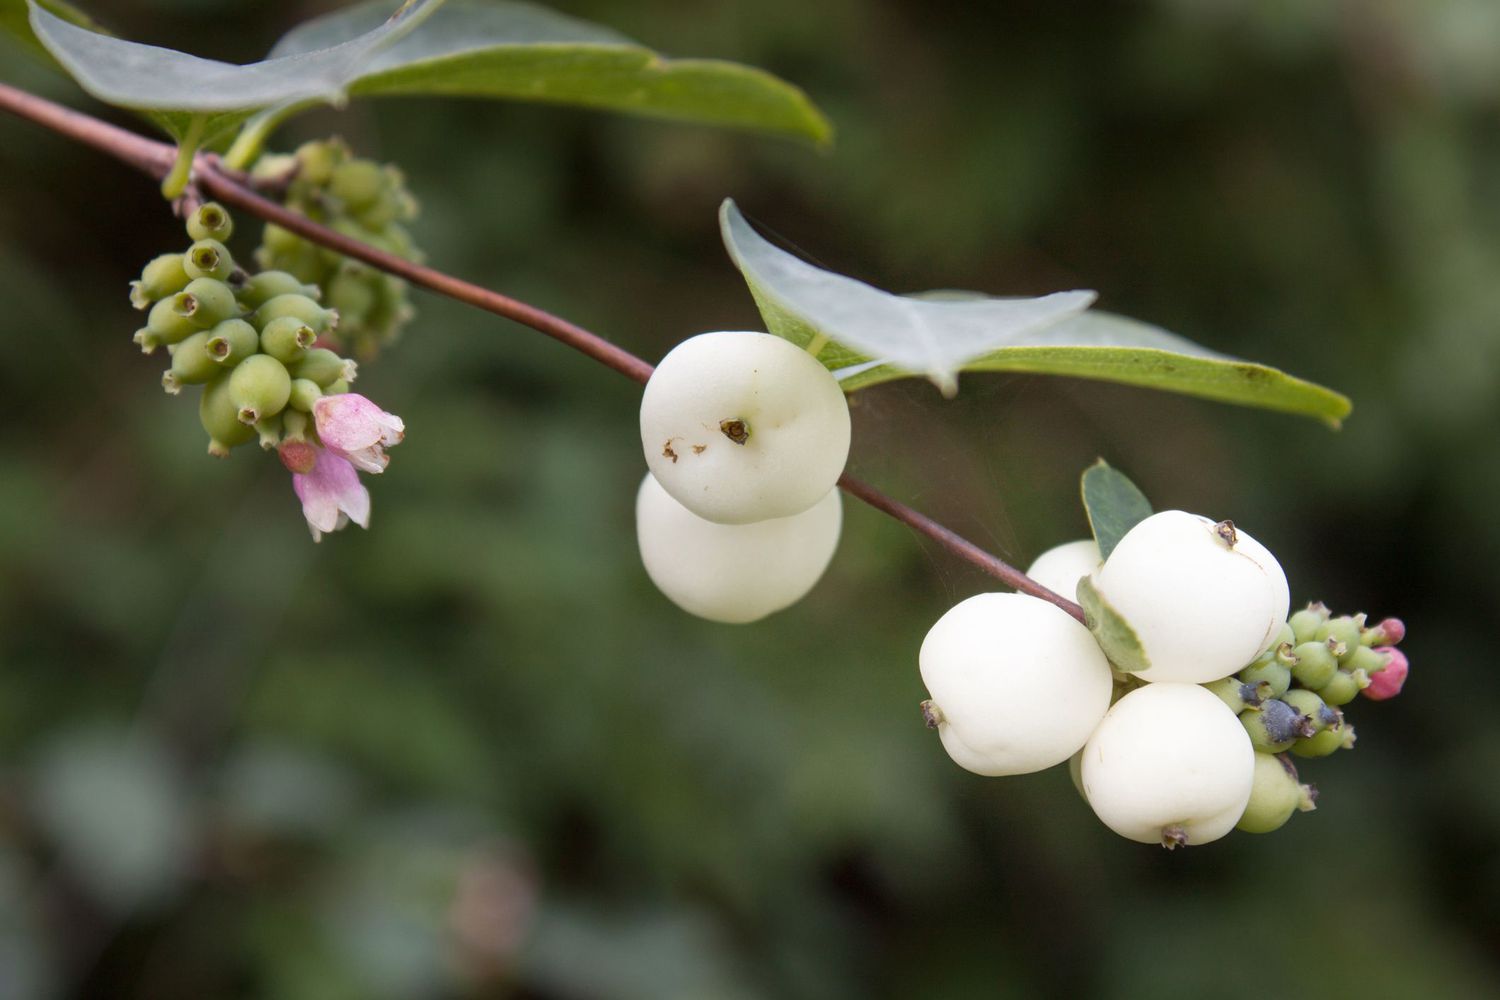 Snowberry shrub branch with creamy white berries and buds closeup